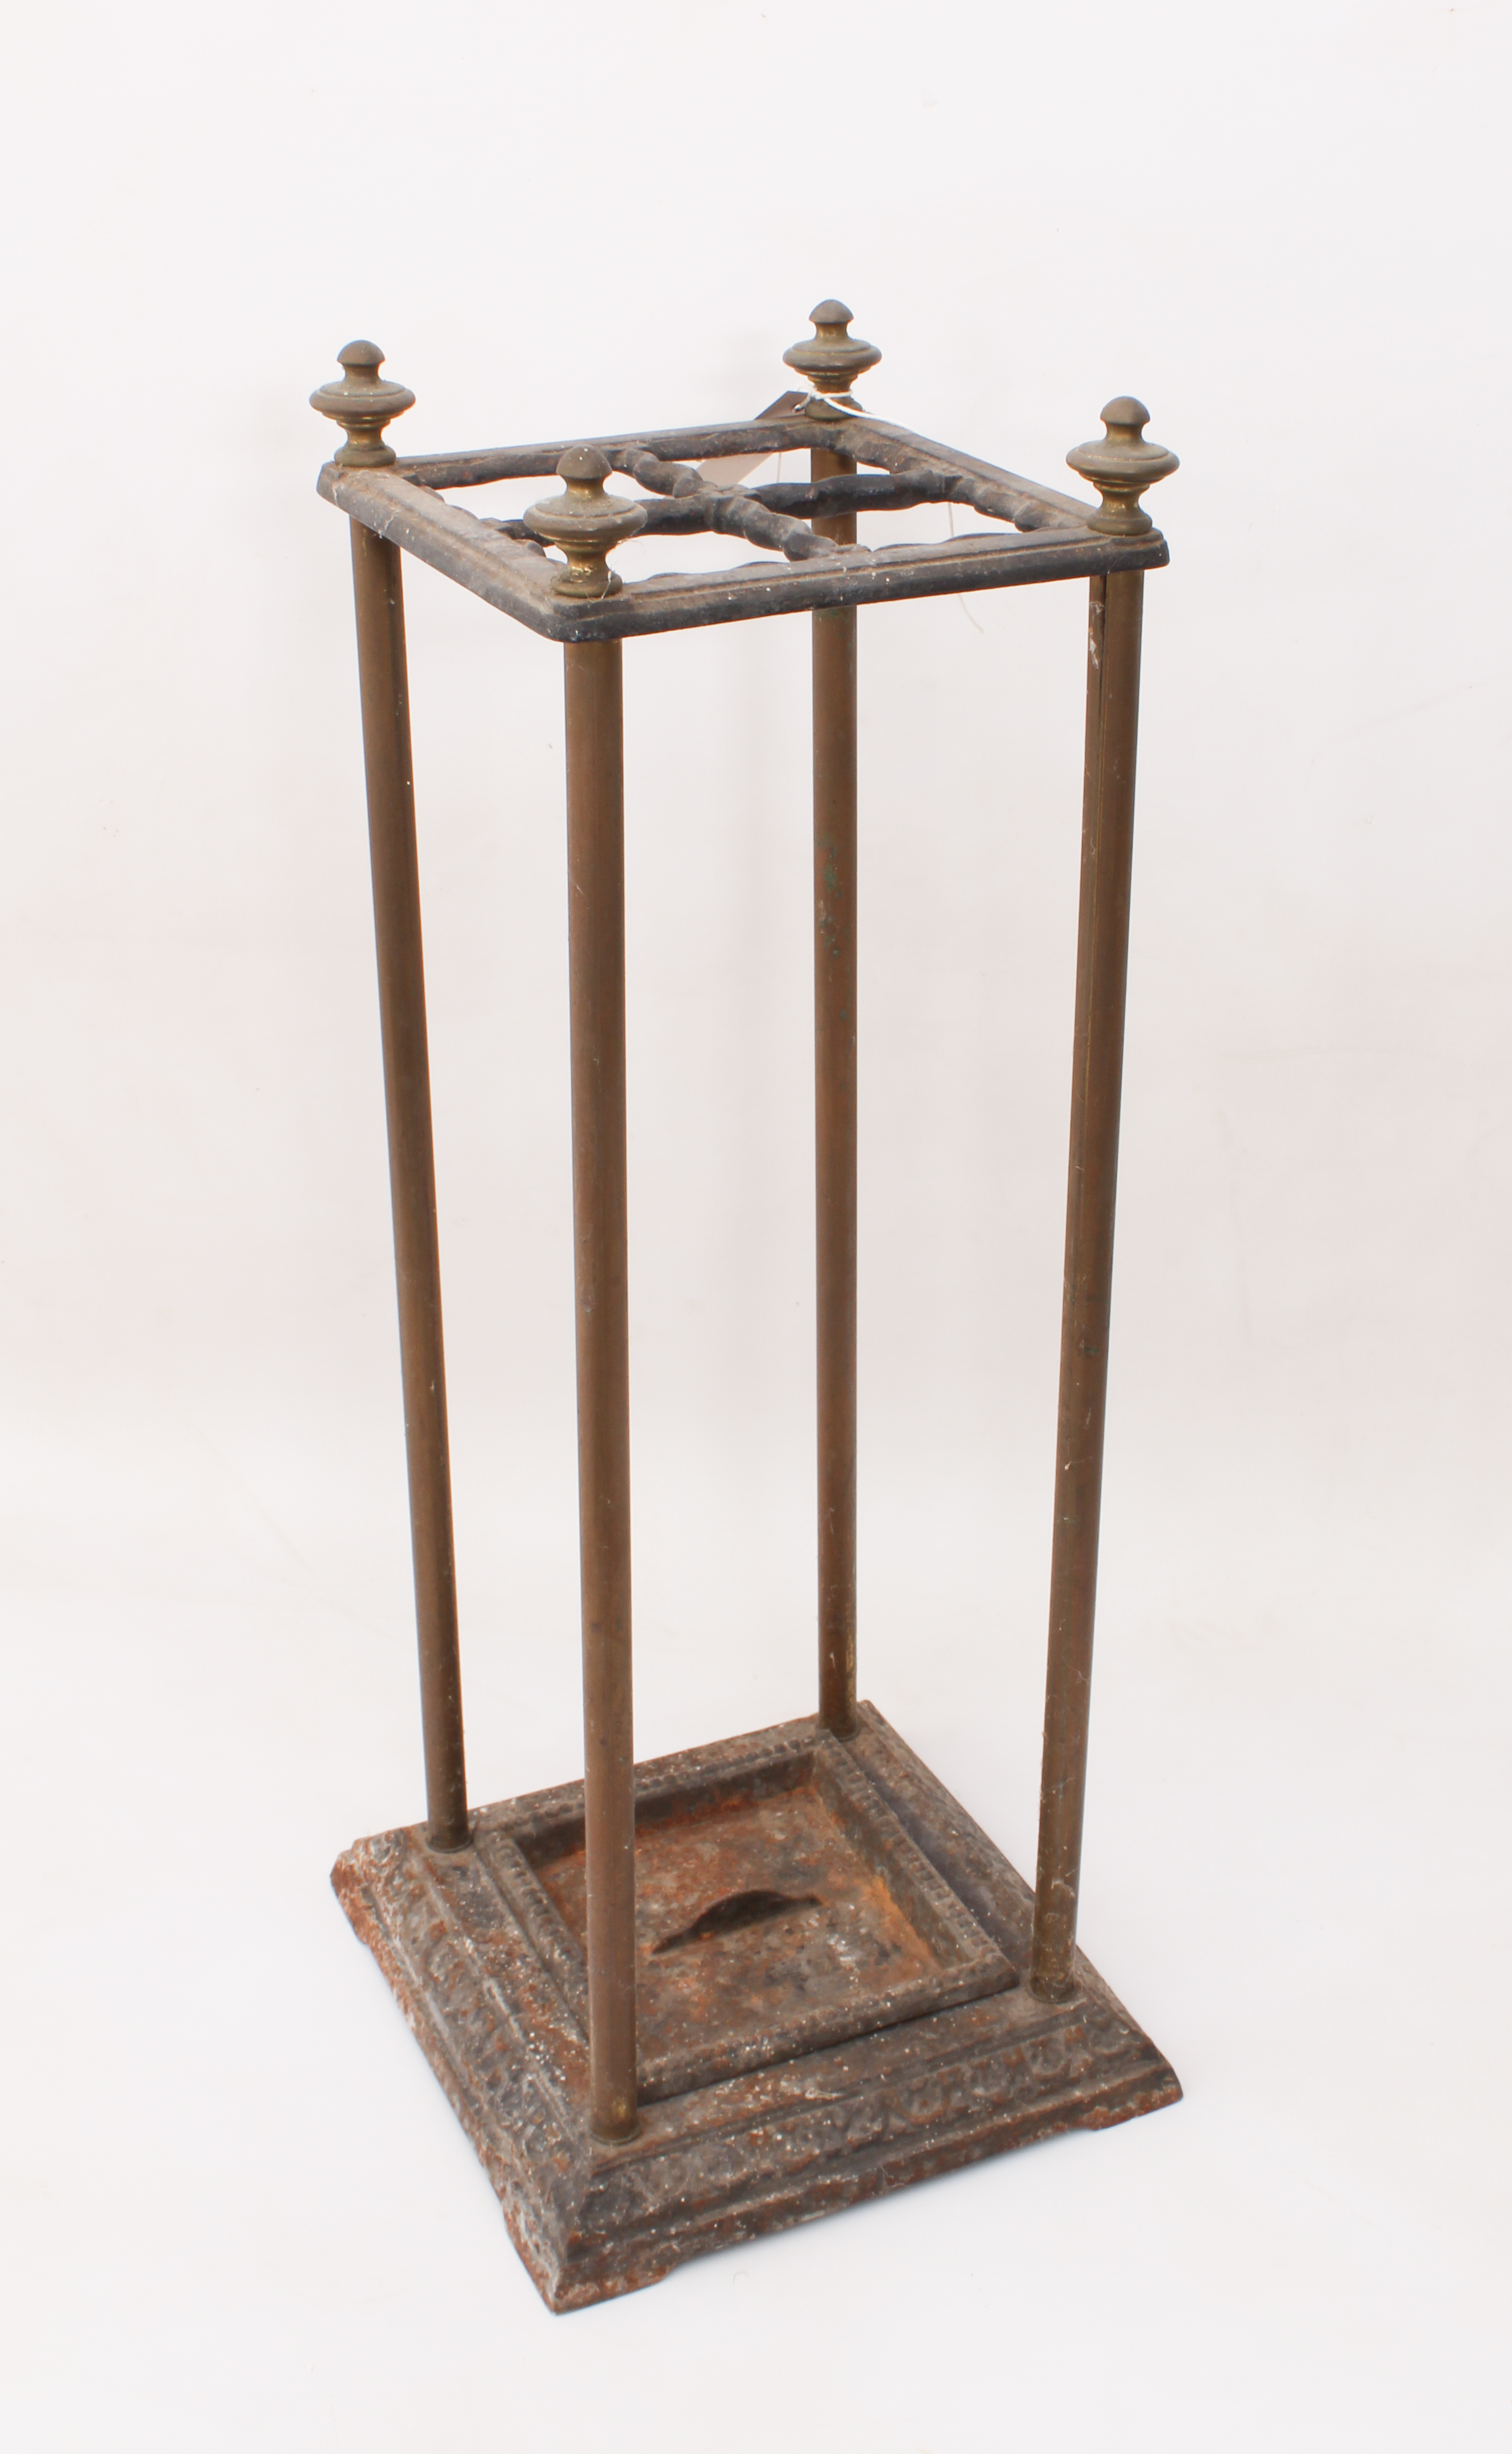 A Victorian-style cast iron and brass stick-stand - 62 cm high. - Image 4 of 4